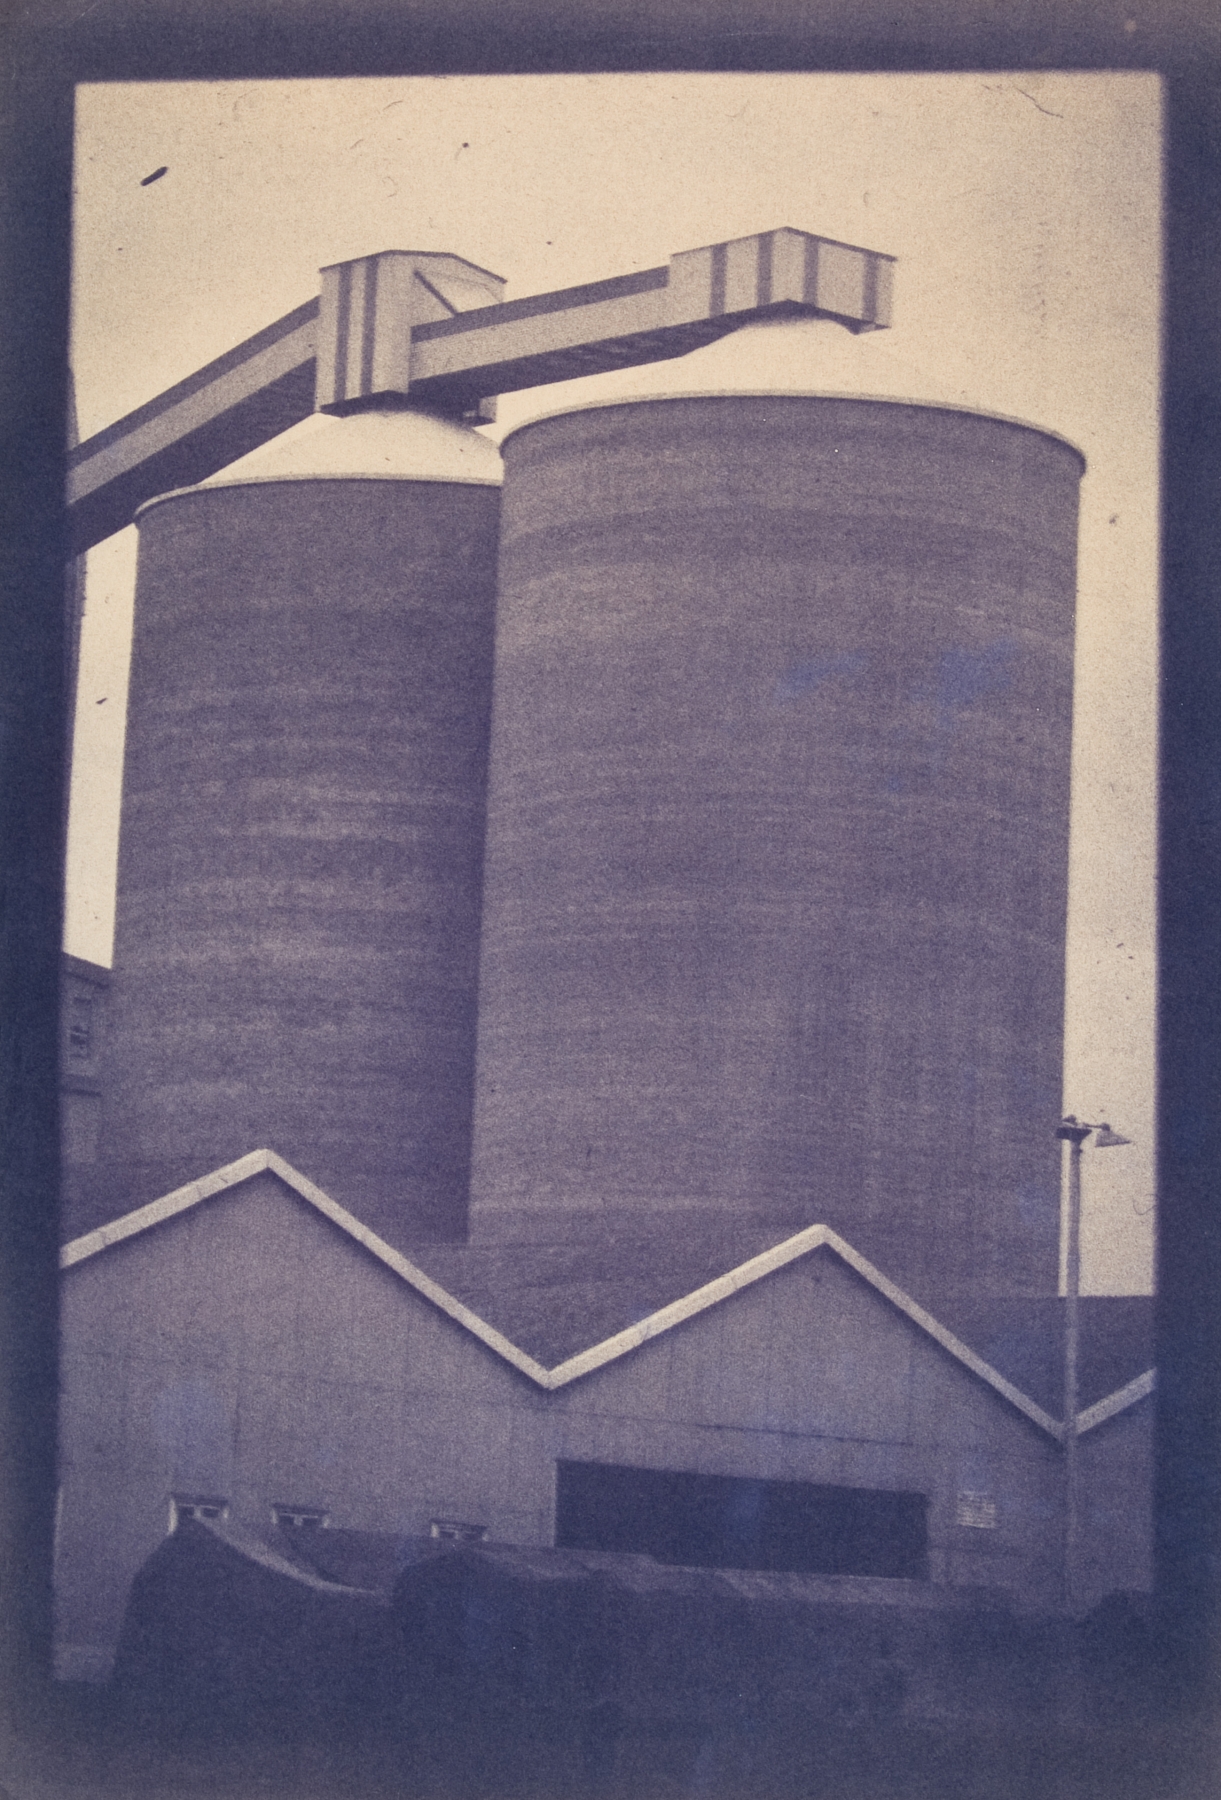 Jeremy Wafer

Harbour series #22, 1988

Ammonia print

Work: 84 x 59.4 cm (33 x 23.4 in.)

Enquire